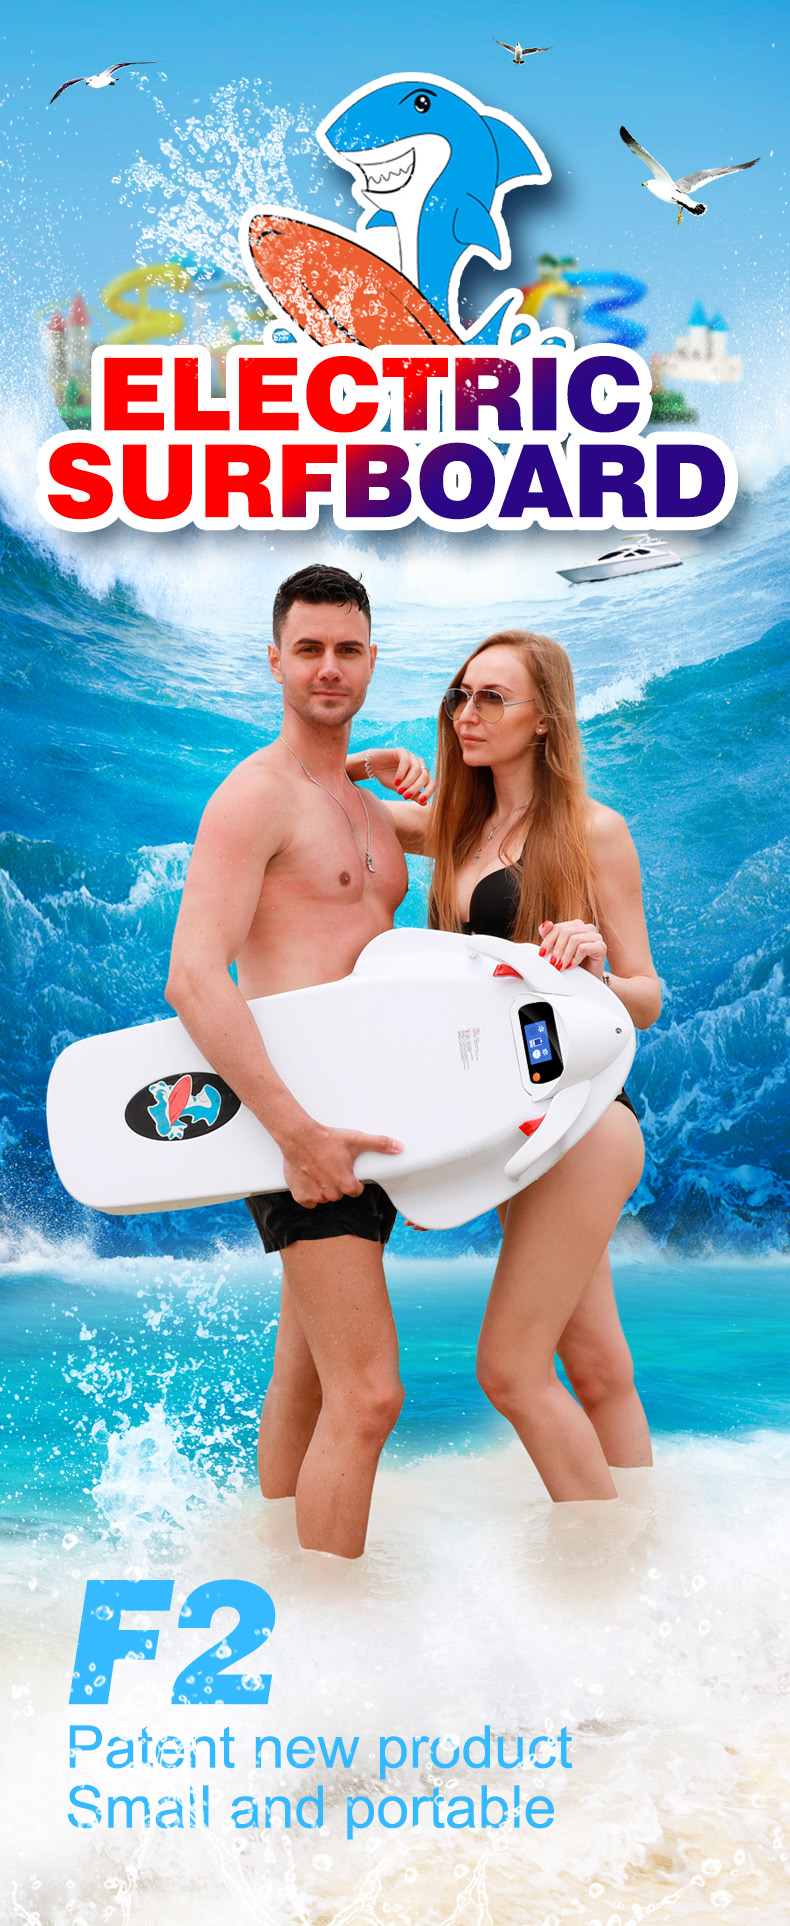 Adult-Underwater-Sea-Scooter-Electric-Surfboard-with-12AH-3200W-36V-Battery-LCD-Display-2-Modes-Prop-1811242-2